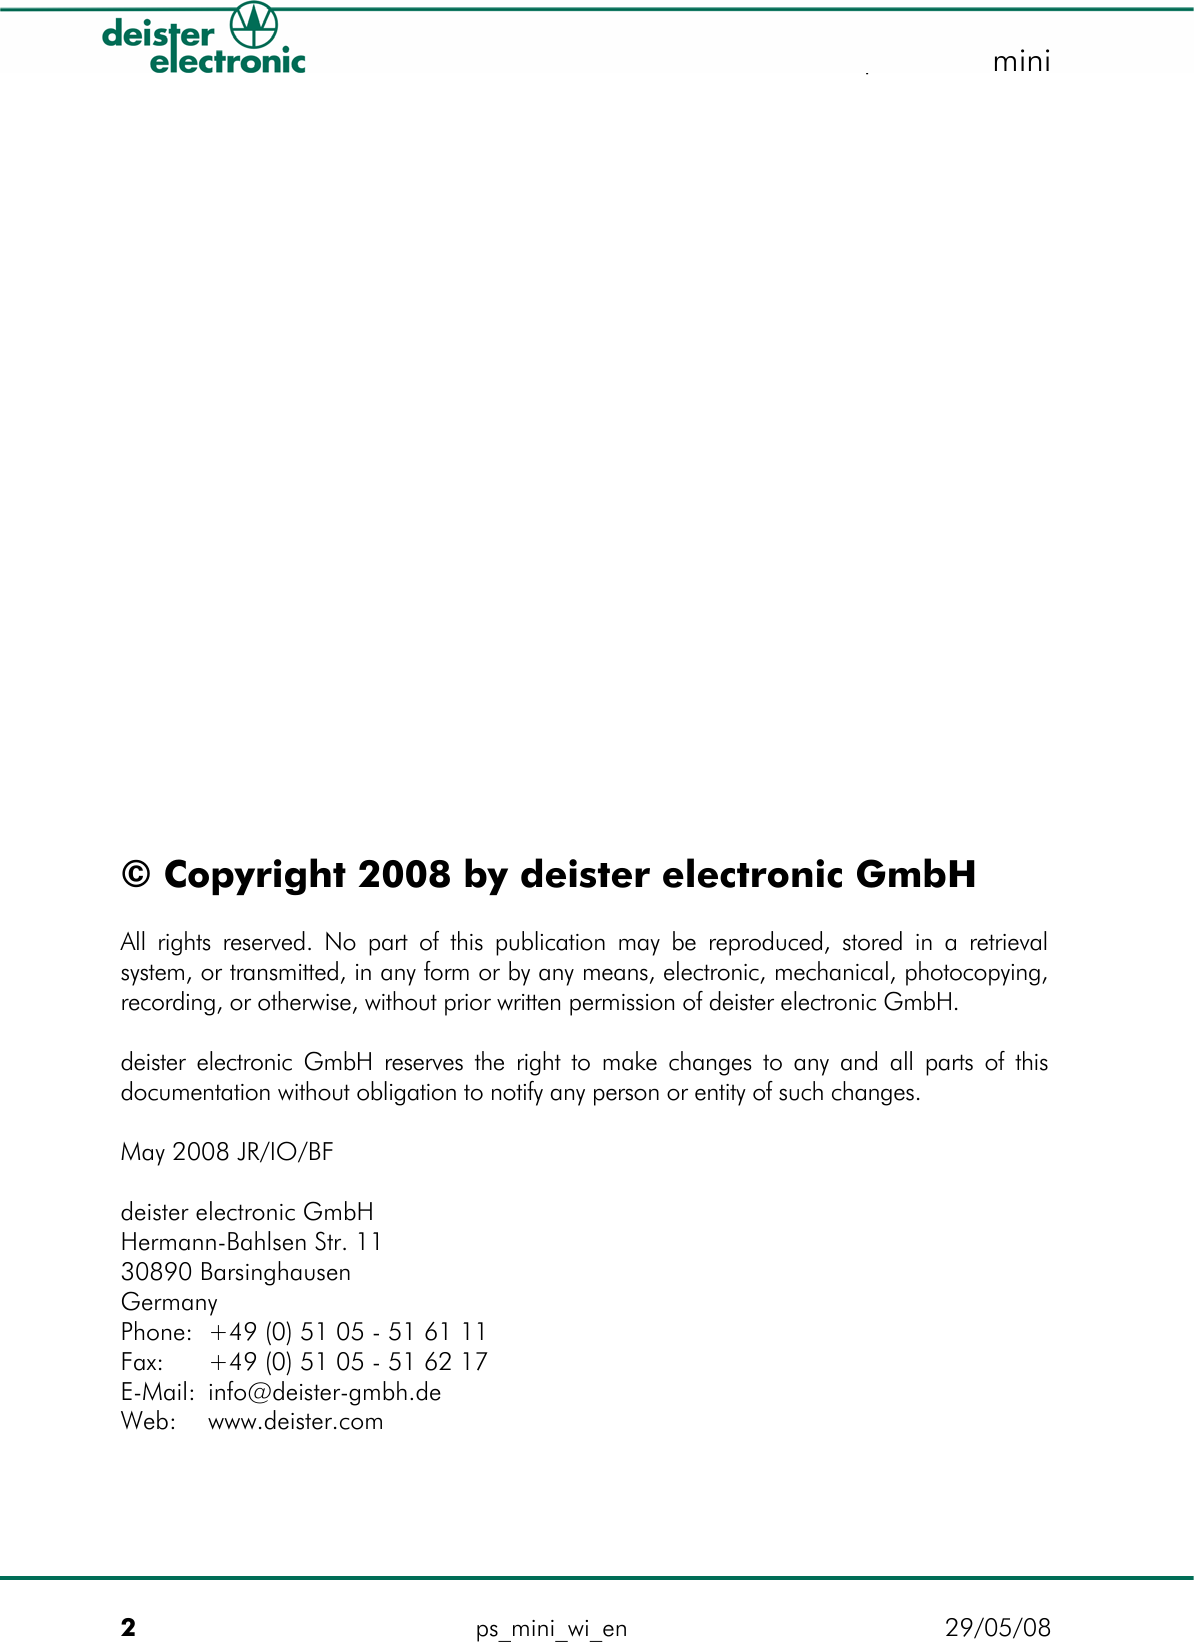   proxSafe minimini                 © Copyright 2008 by deister electronic GmbH  All rights reserved. No part of this publication may be reproduced, stored in a retrieval system, or transmitted, in any form or by any means, electronic, mechanical, photocopying, recording, or otherwise, without prior written permission of deister electronic GmbH.  deister electronic GmbH reserves the right to make changes to any and all parts of this documentation without obligation to notify any person or entity of such changes.  May 2008 JR/IO/BF  deister electronic GmbH Hermann-Bahlsen Str. 11  30890 Barsinghausen Germany Phone:  +49 (0) 51 05 - 51 61 11 Fax:  +49 (0) 51 05 - 51 62 17 E-Mail: info@deister-gmbh.de Web:  www.deister.com   2  ps_mini_wi_en  29/05/08 